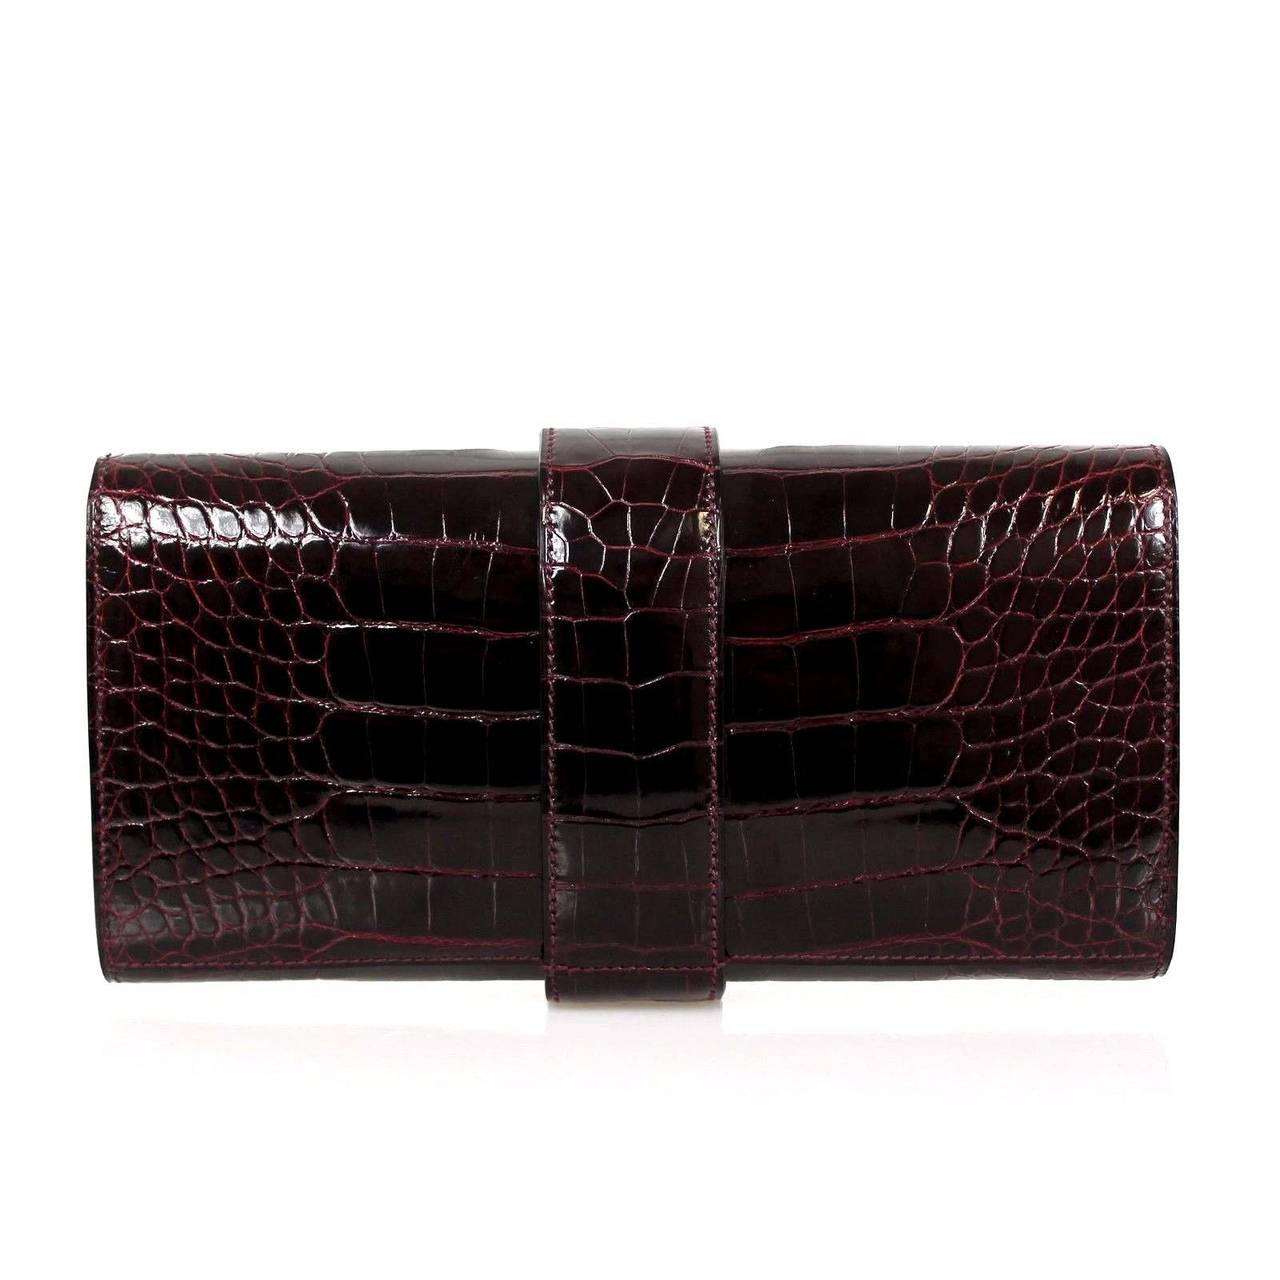 The bag features:. Signature stud lock closure. 

Material: shiny nilo crocodile.

 Color: black. Hardware: palladium. 

Condition: excellent. Made in France.

Includes: Dustbag, Box, and Cites

DOES NOT INCLUDE TAGS